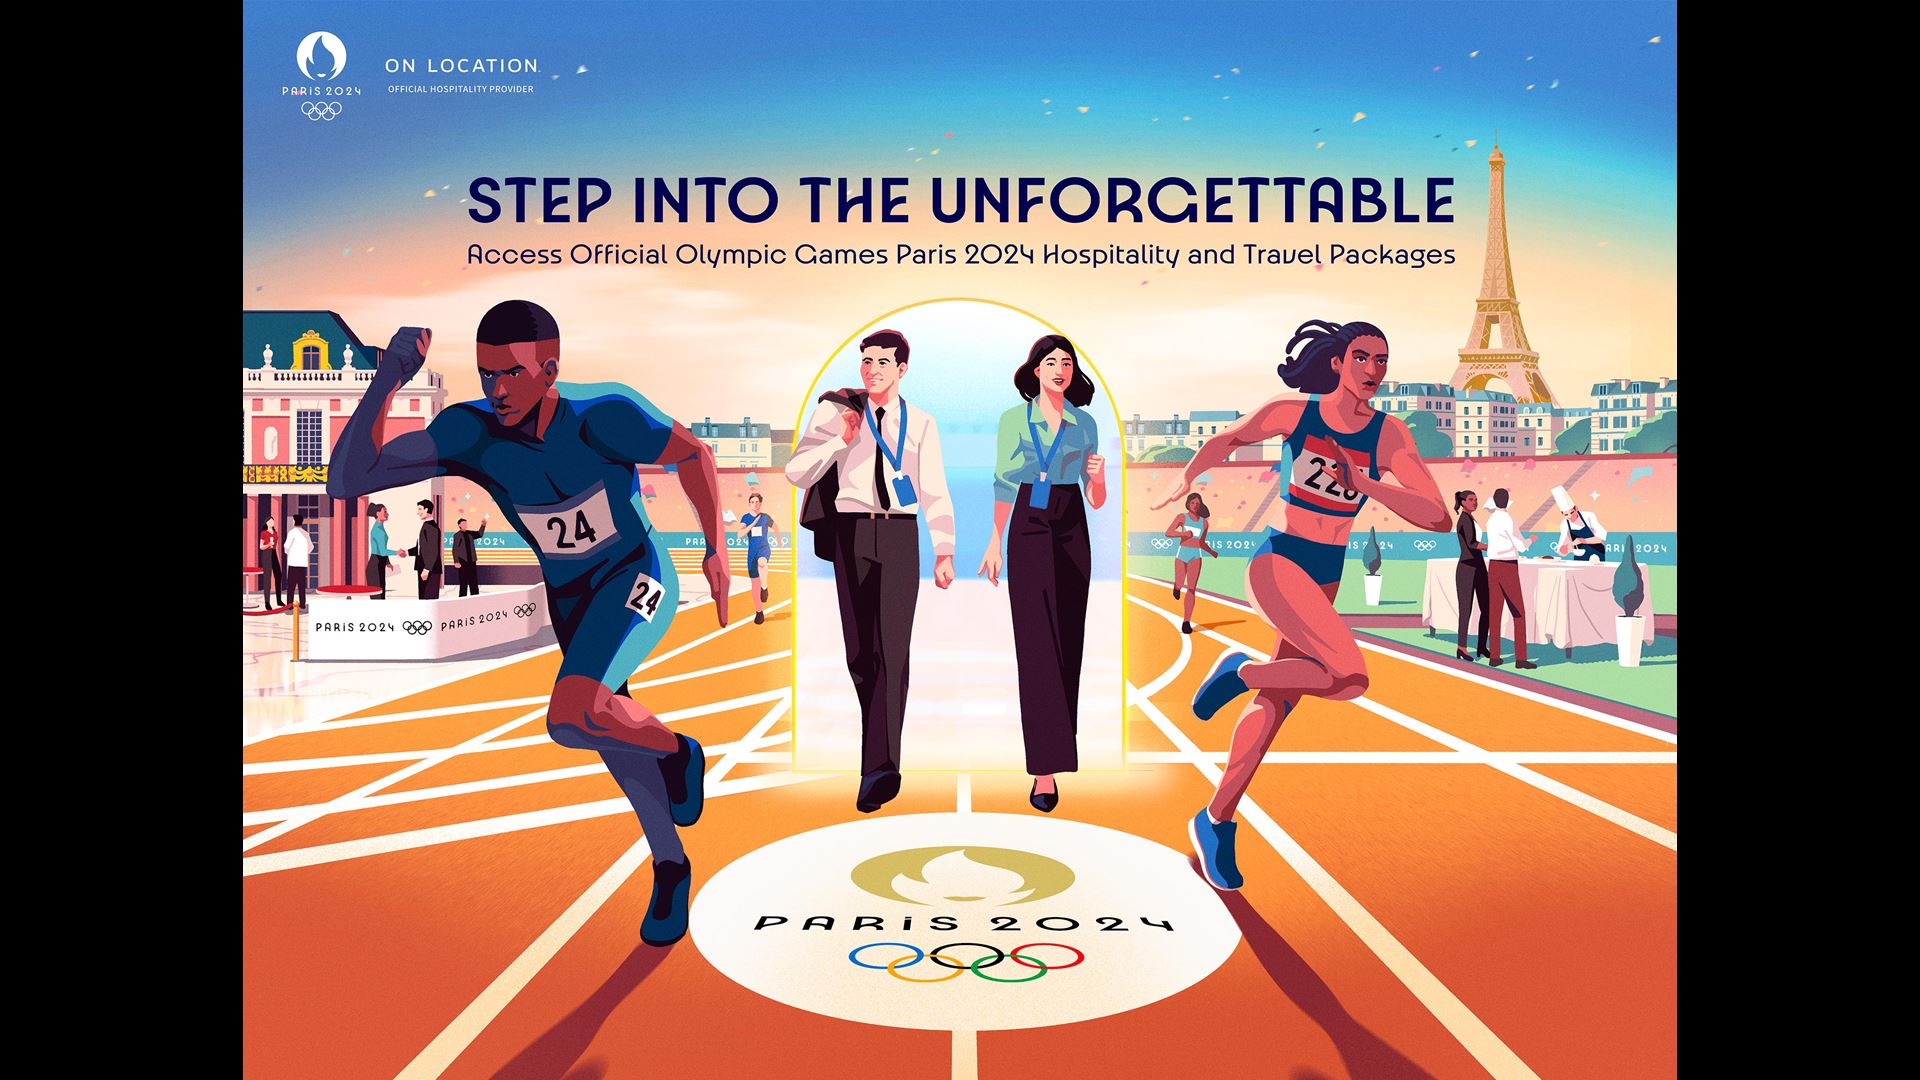 Olympic Games Paris 2024 hospitality platform opens for public sales